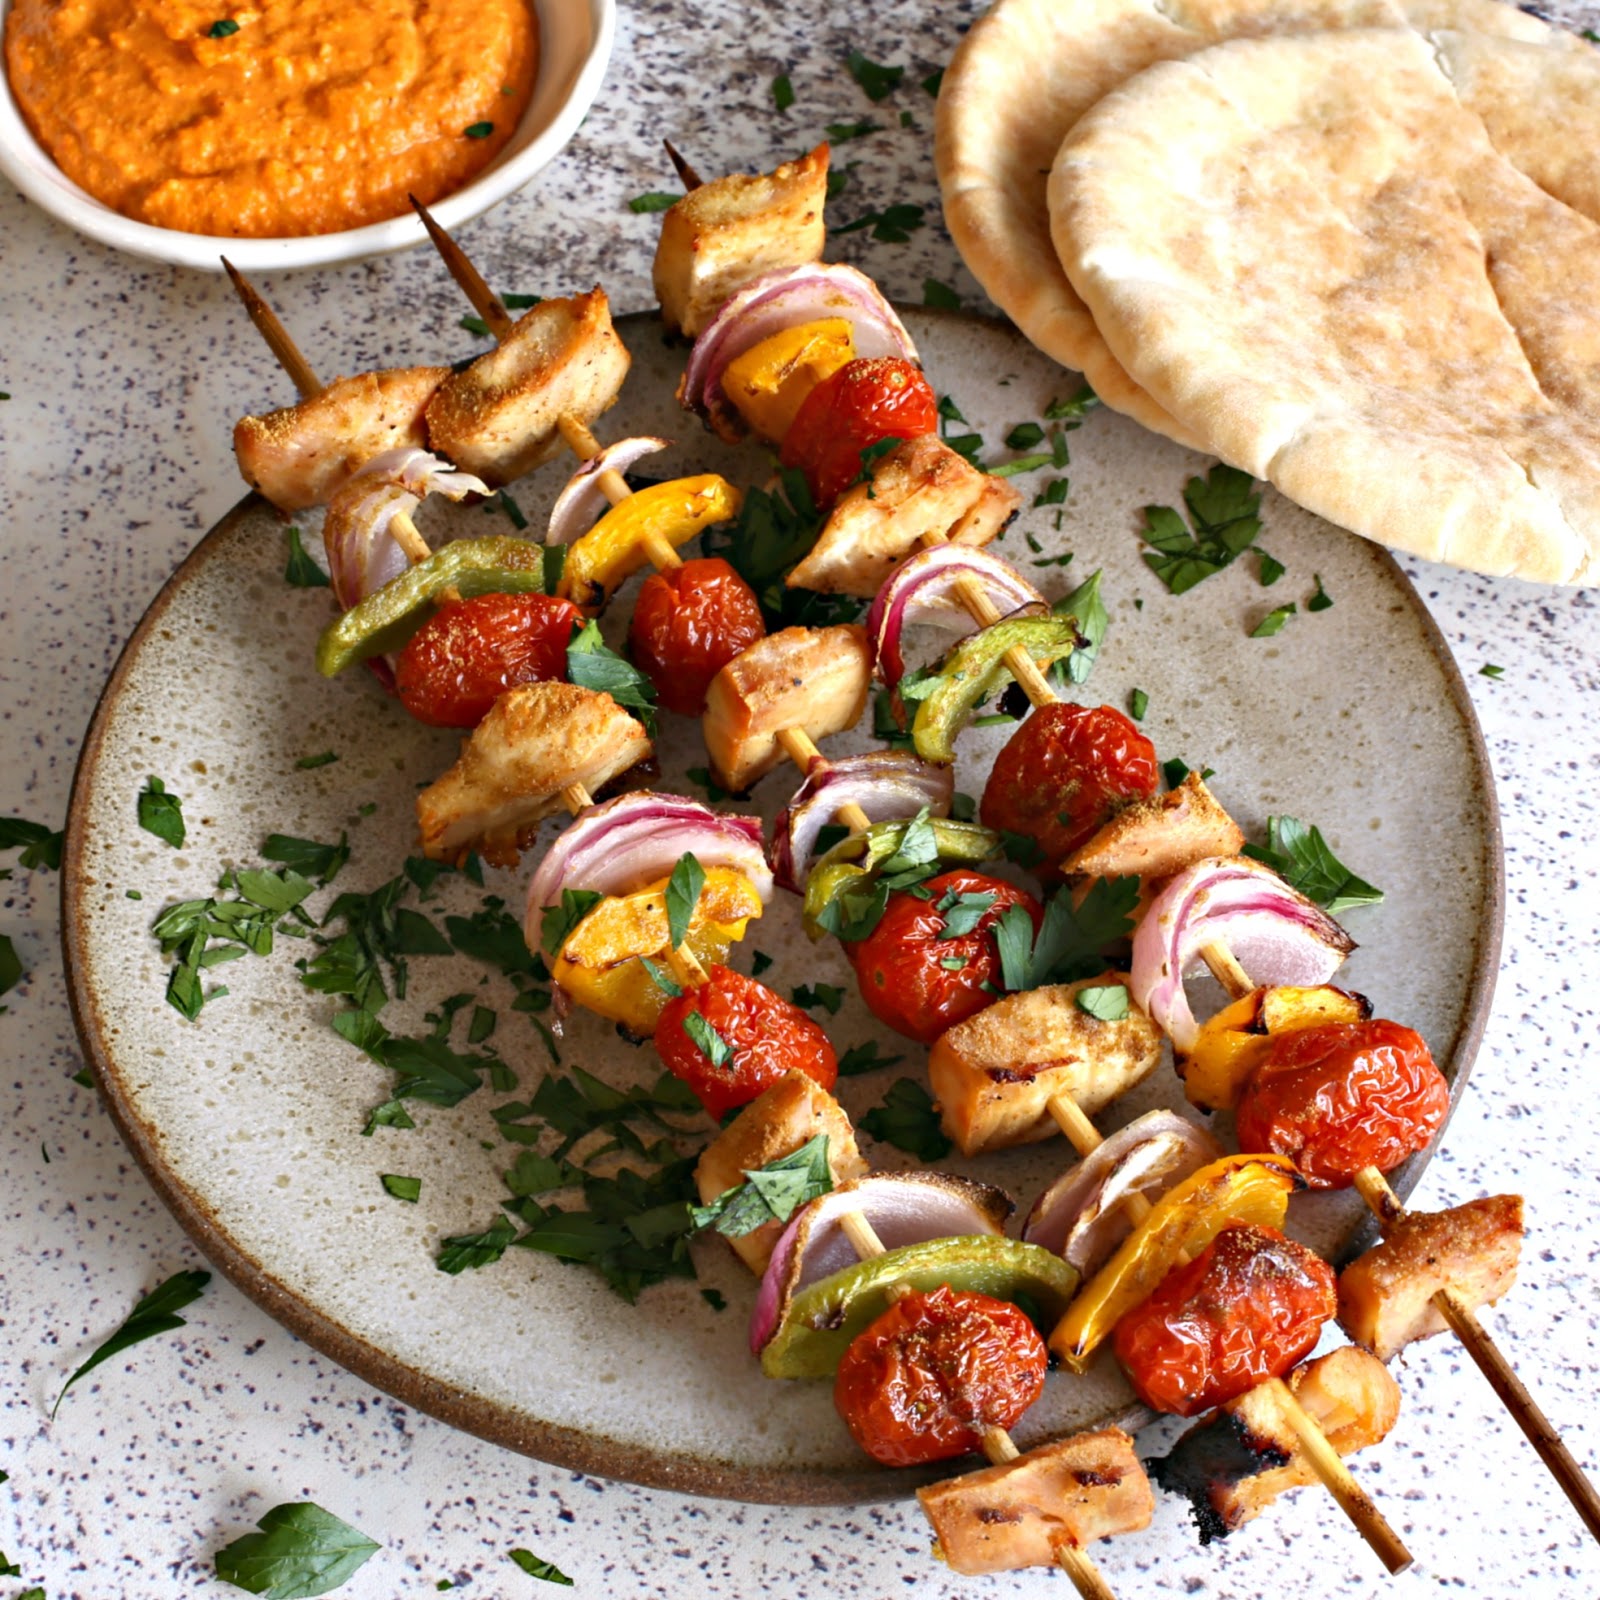 Chicken and vegetables, grilled on skewers, served with a smoky roasted red pepper sauce.